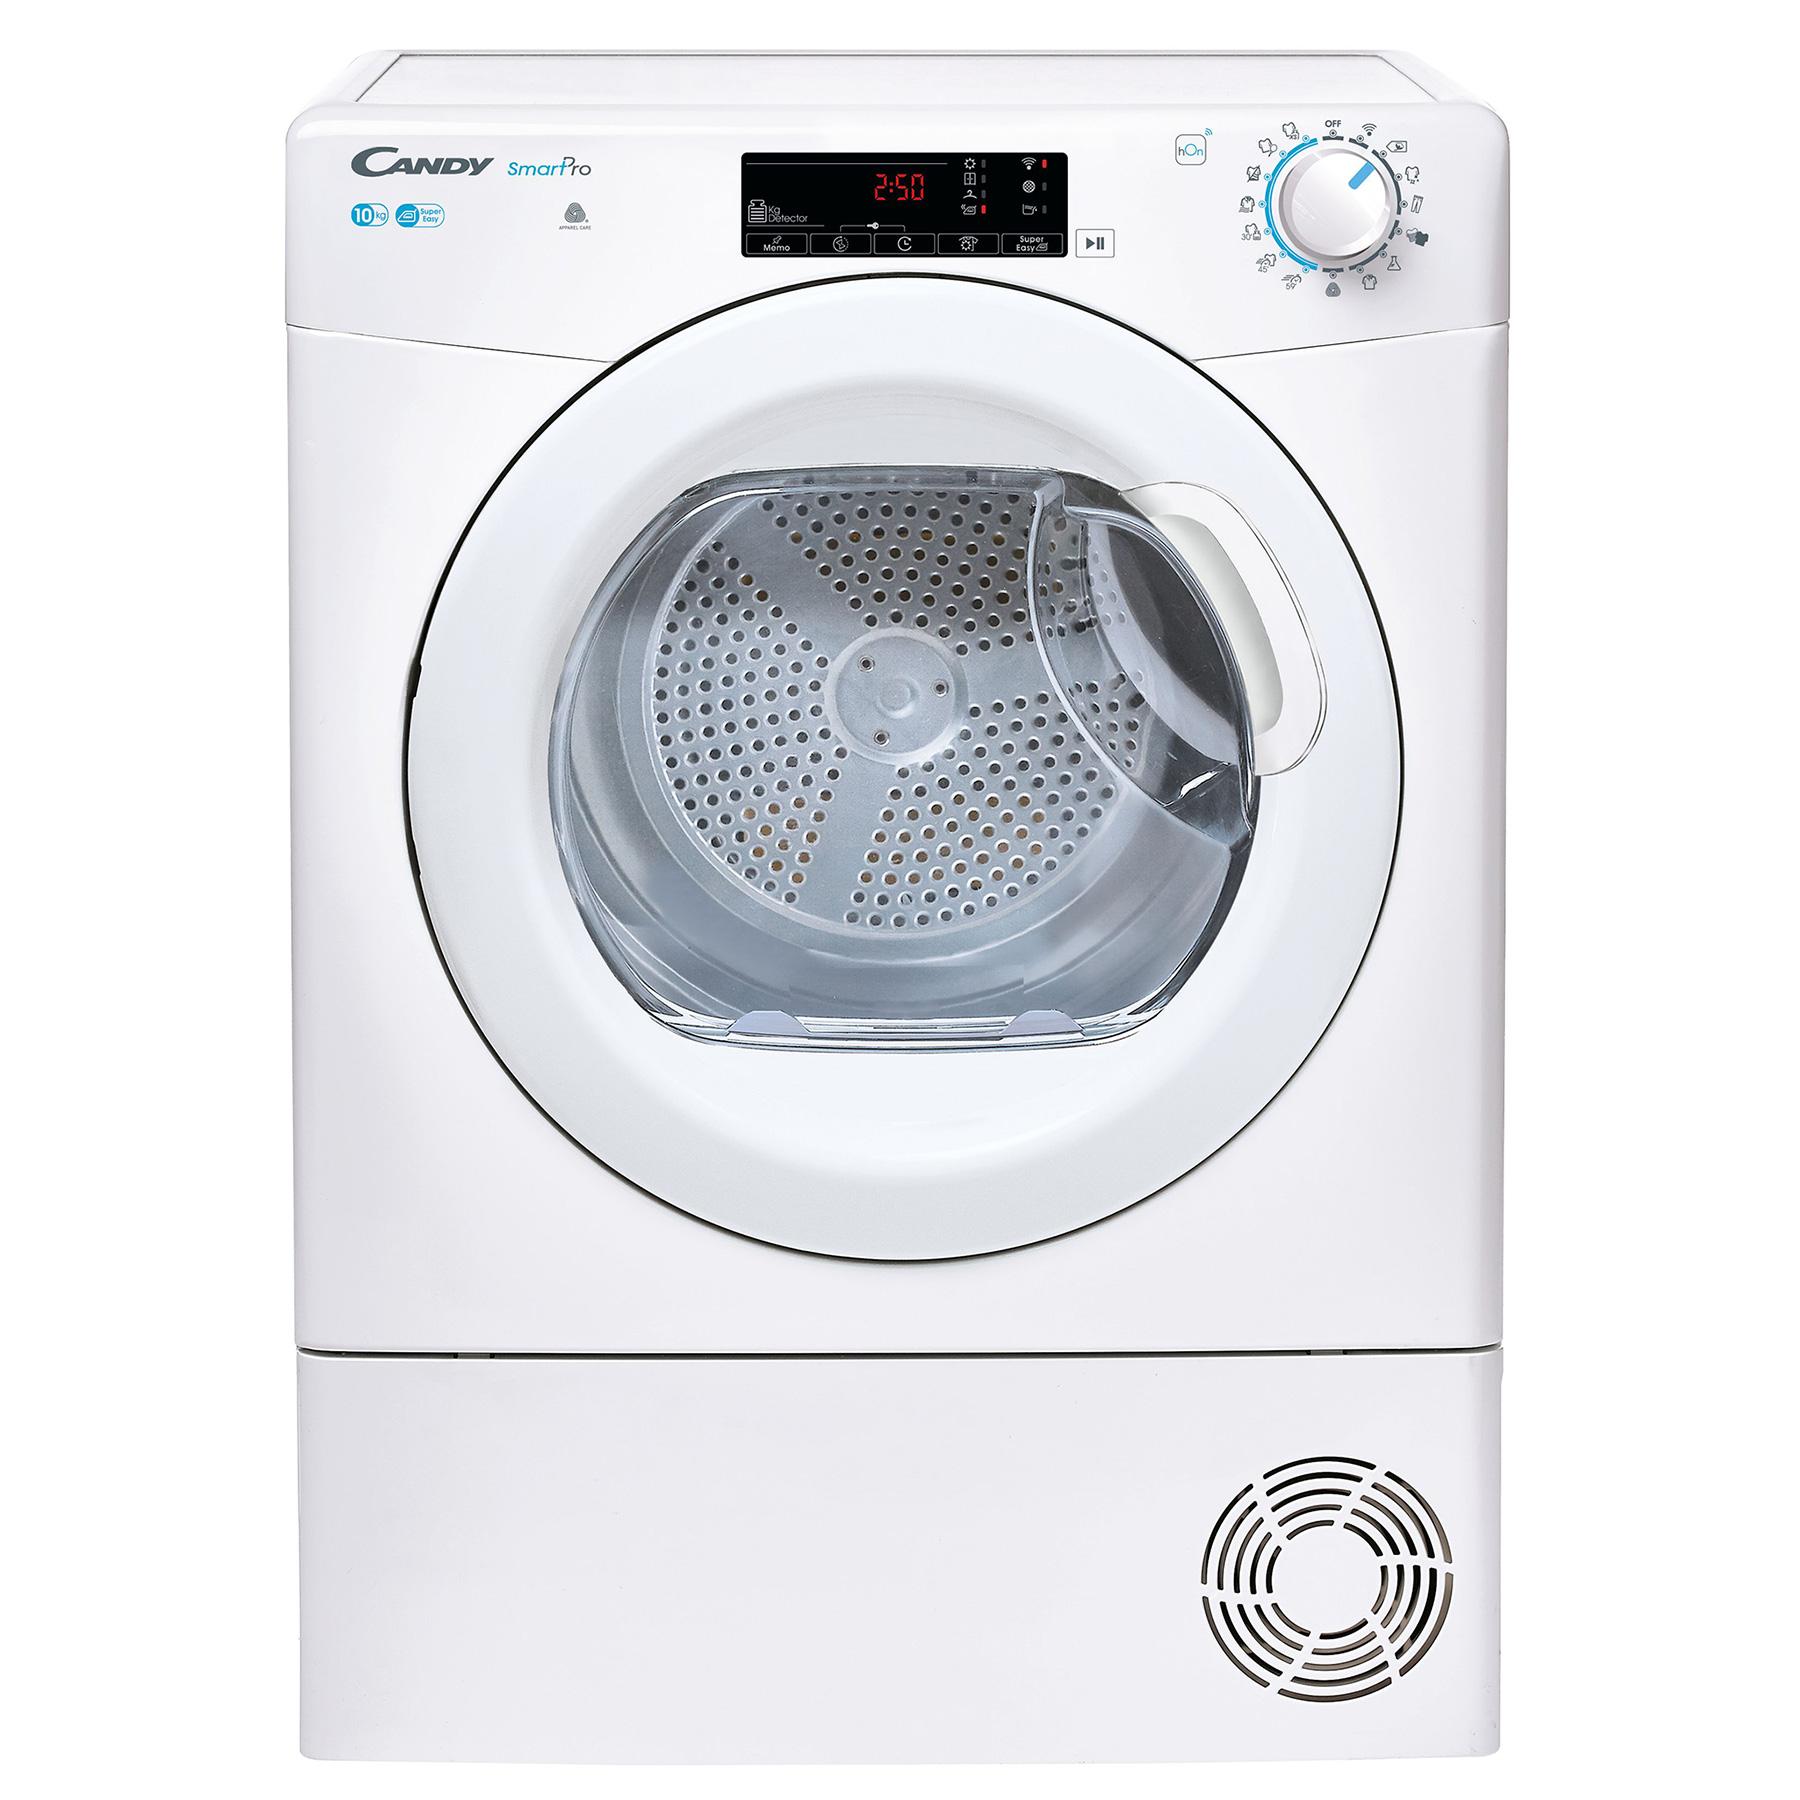 Image of Candy CSOEC10TG 10kg Condenser Dryer in White B Rated Sensor Dry Wi Fi